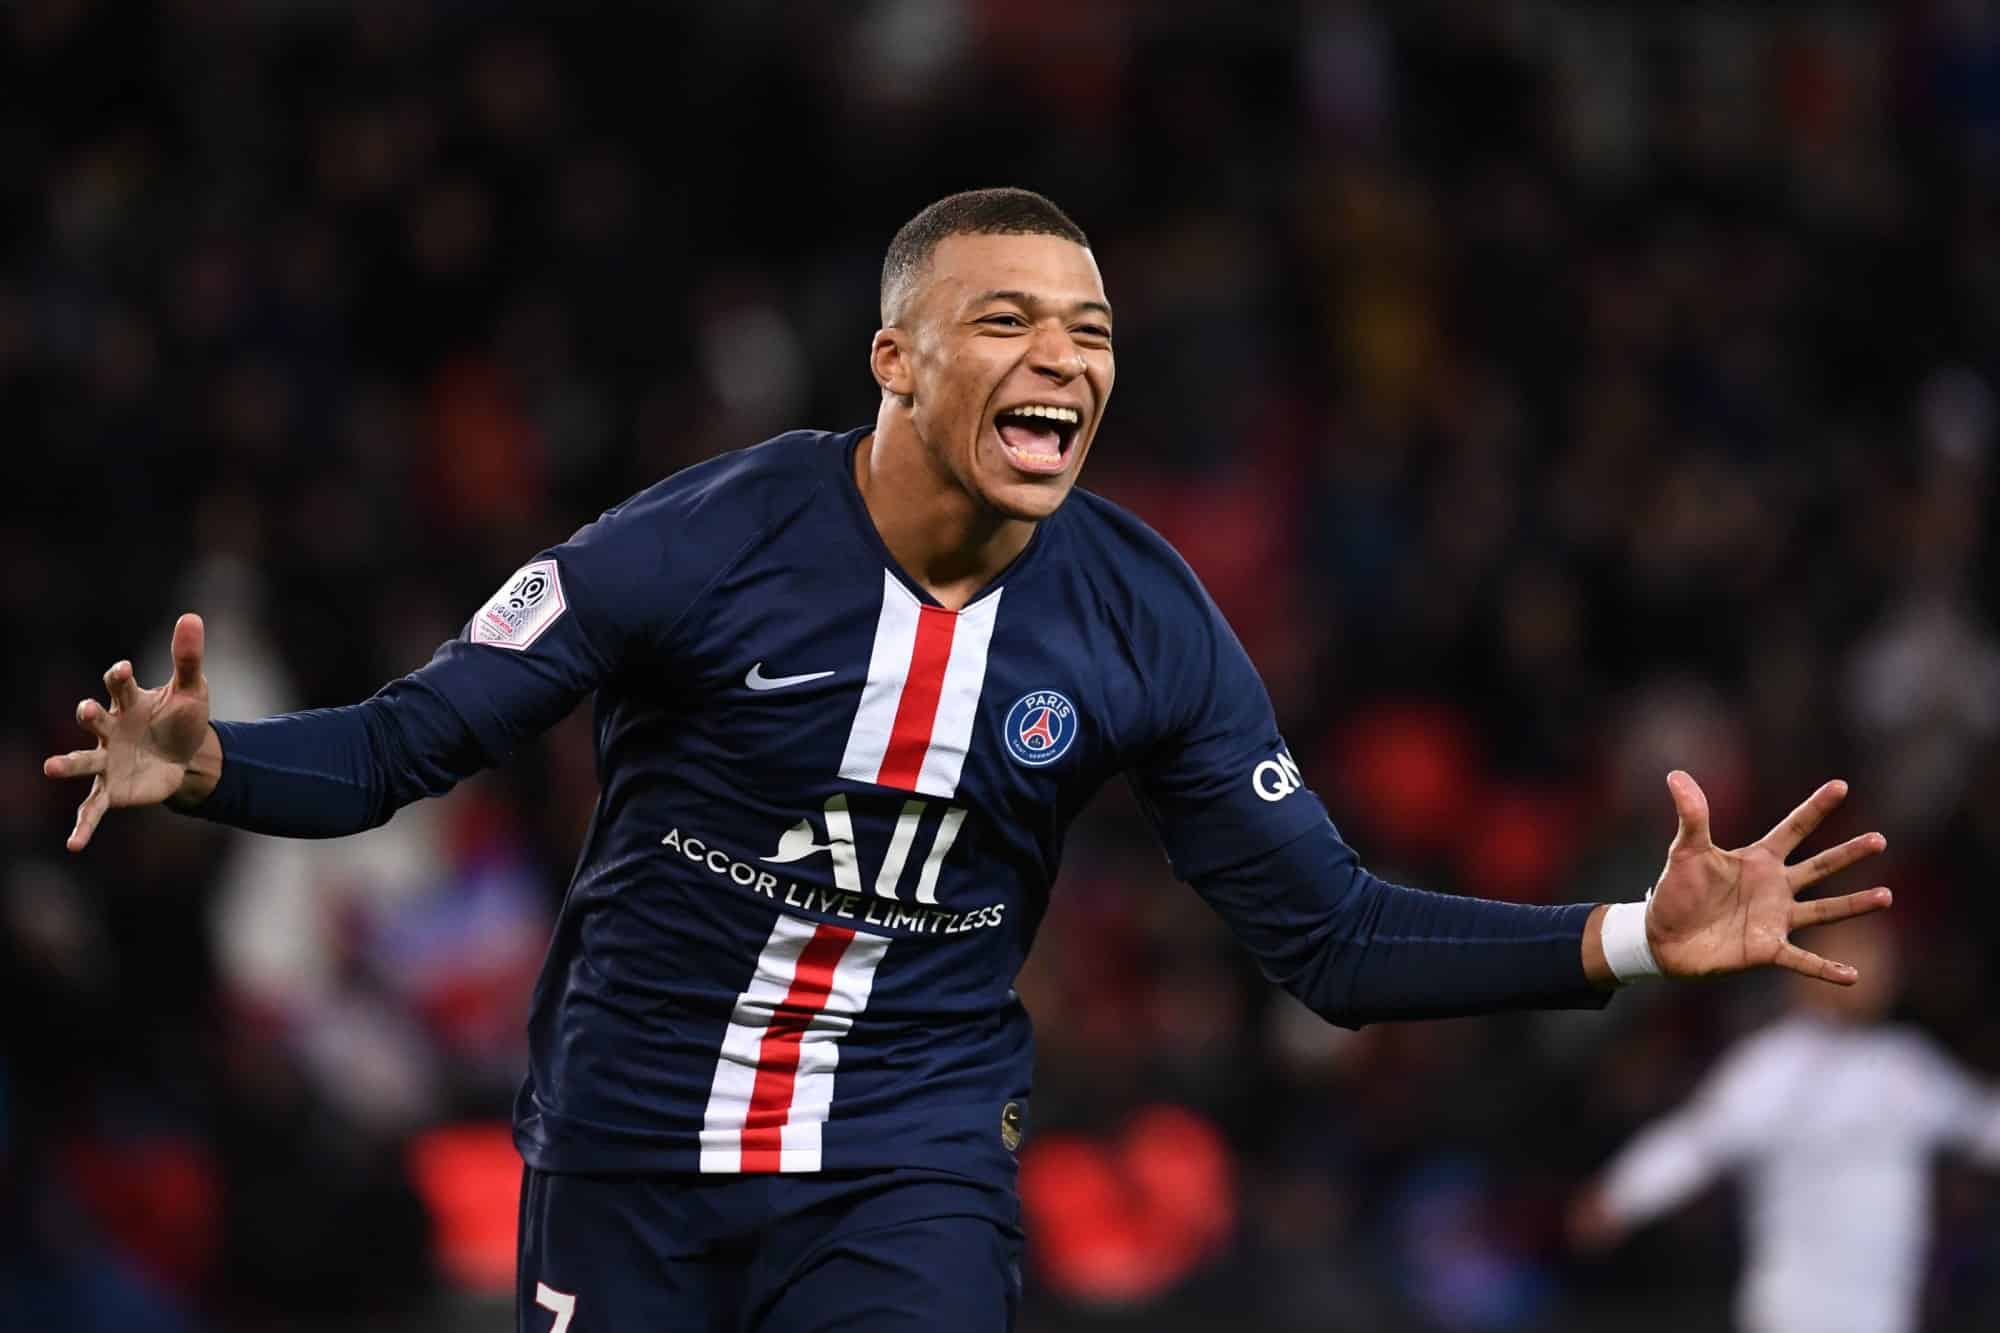 Kylian Mbappe misses living simply, with less attention